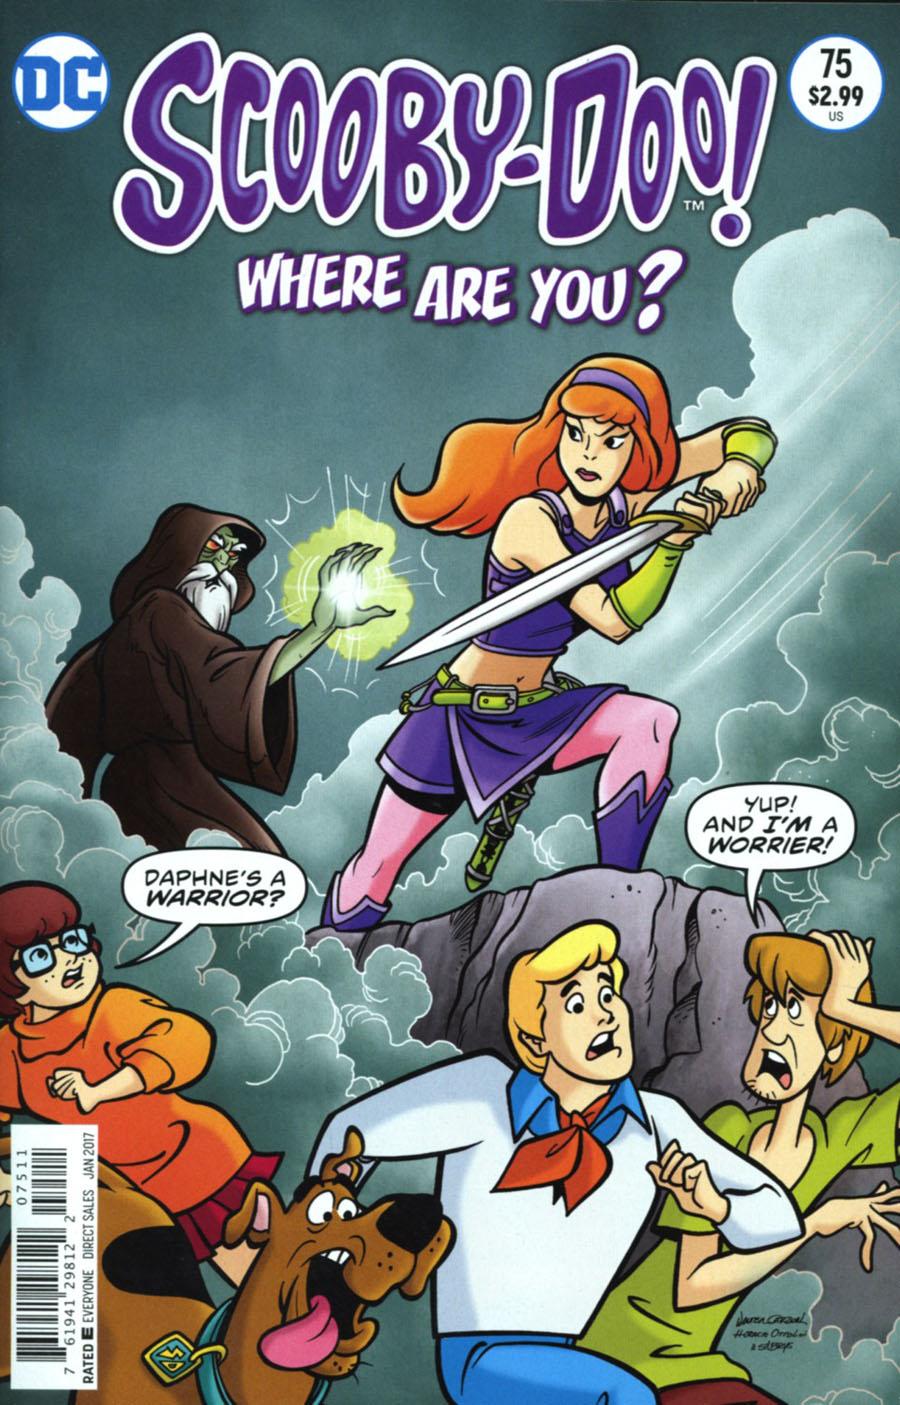 Scooby-Doo Where Are You Vol. 1 #75